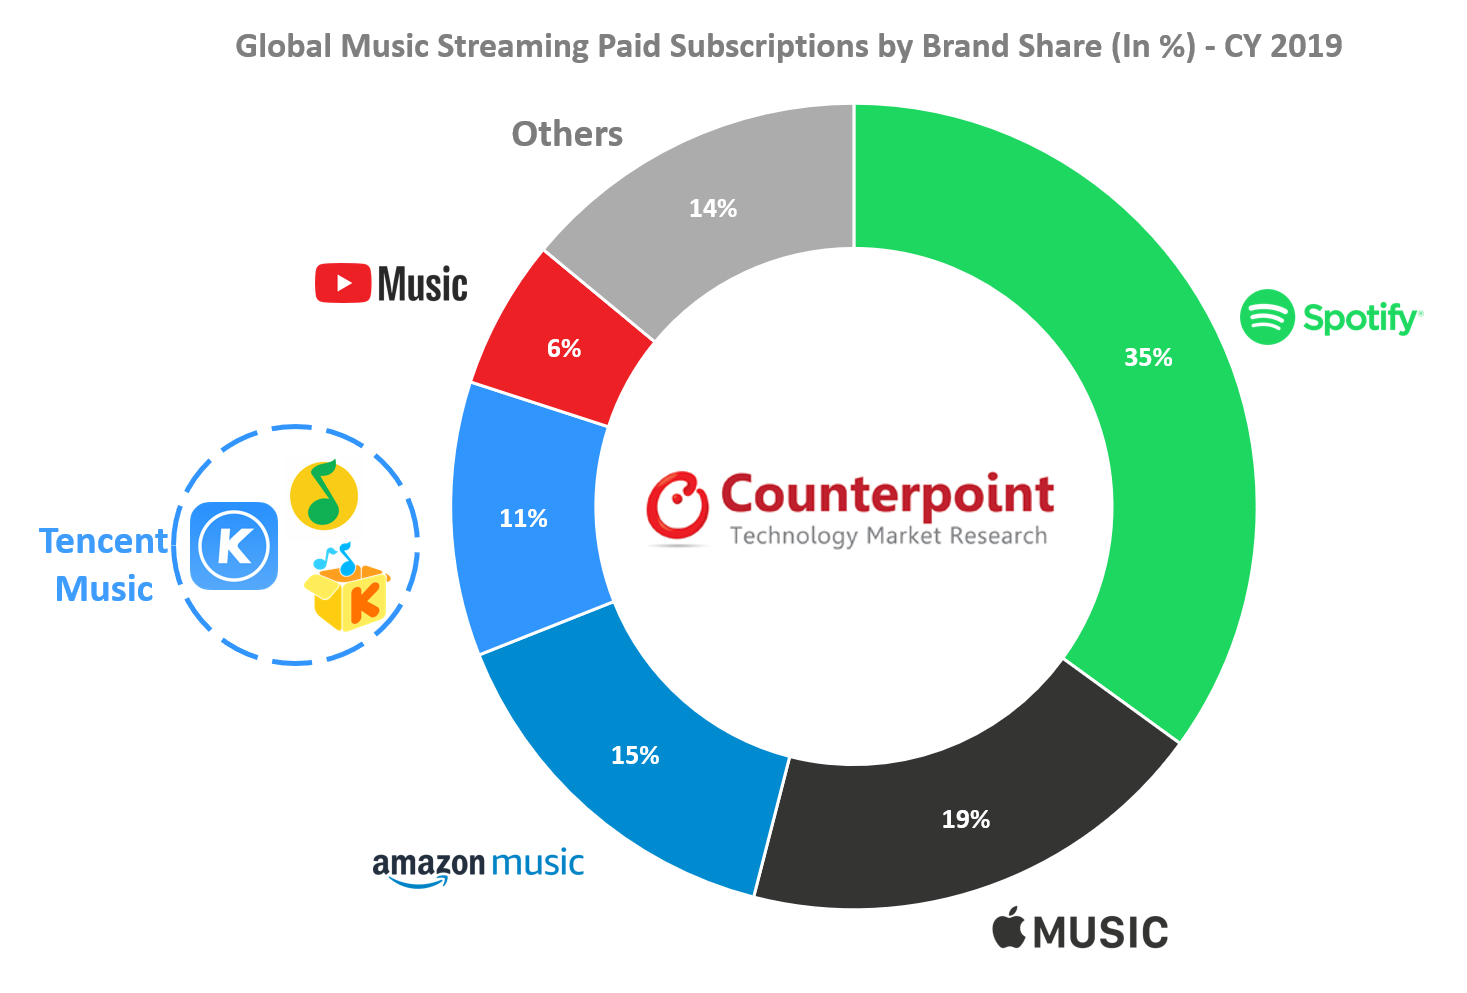 Podcast: What Drove Paid Music Subscription Growth in 2019?